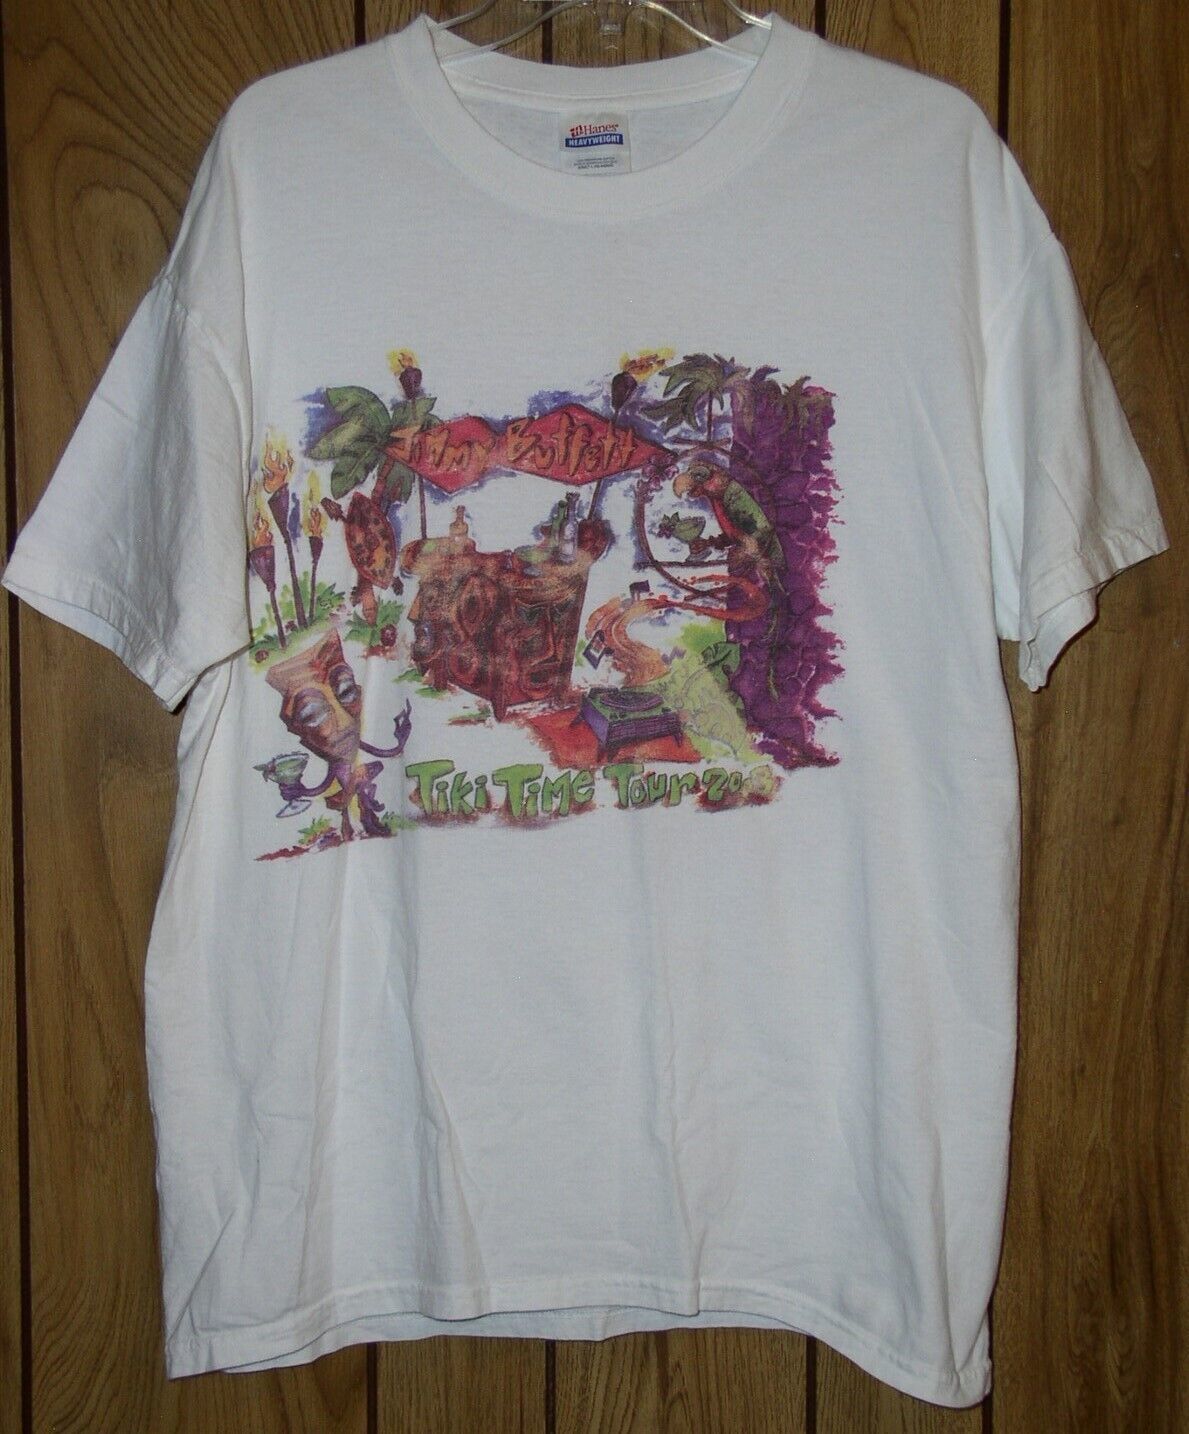 Primary image for Jimmy Buffett Concert Tour T Shirt Vintage 2003 Tiki Time Tour Size Large